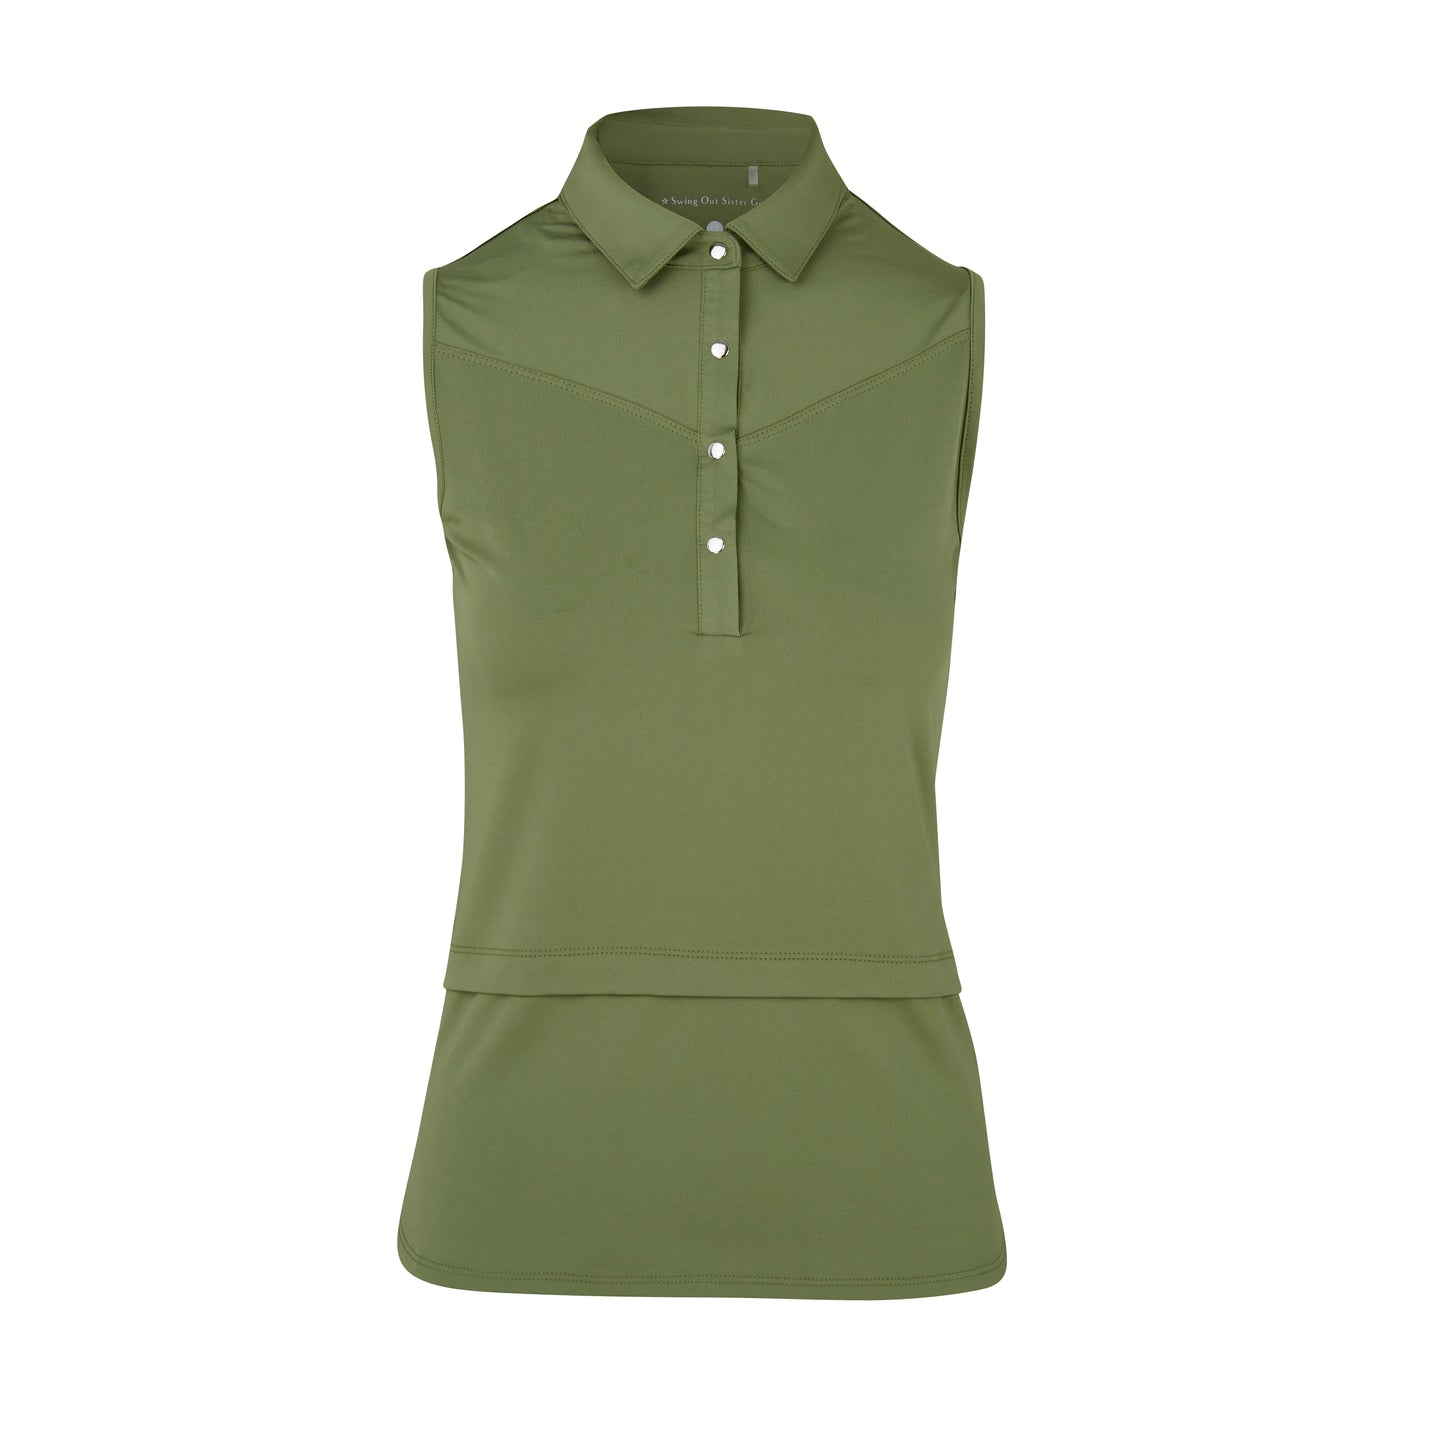 Swing Out Sister Amelie Sleeveless Polo - Olive Green